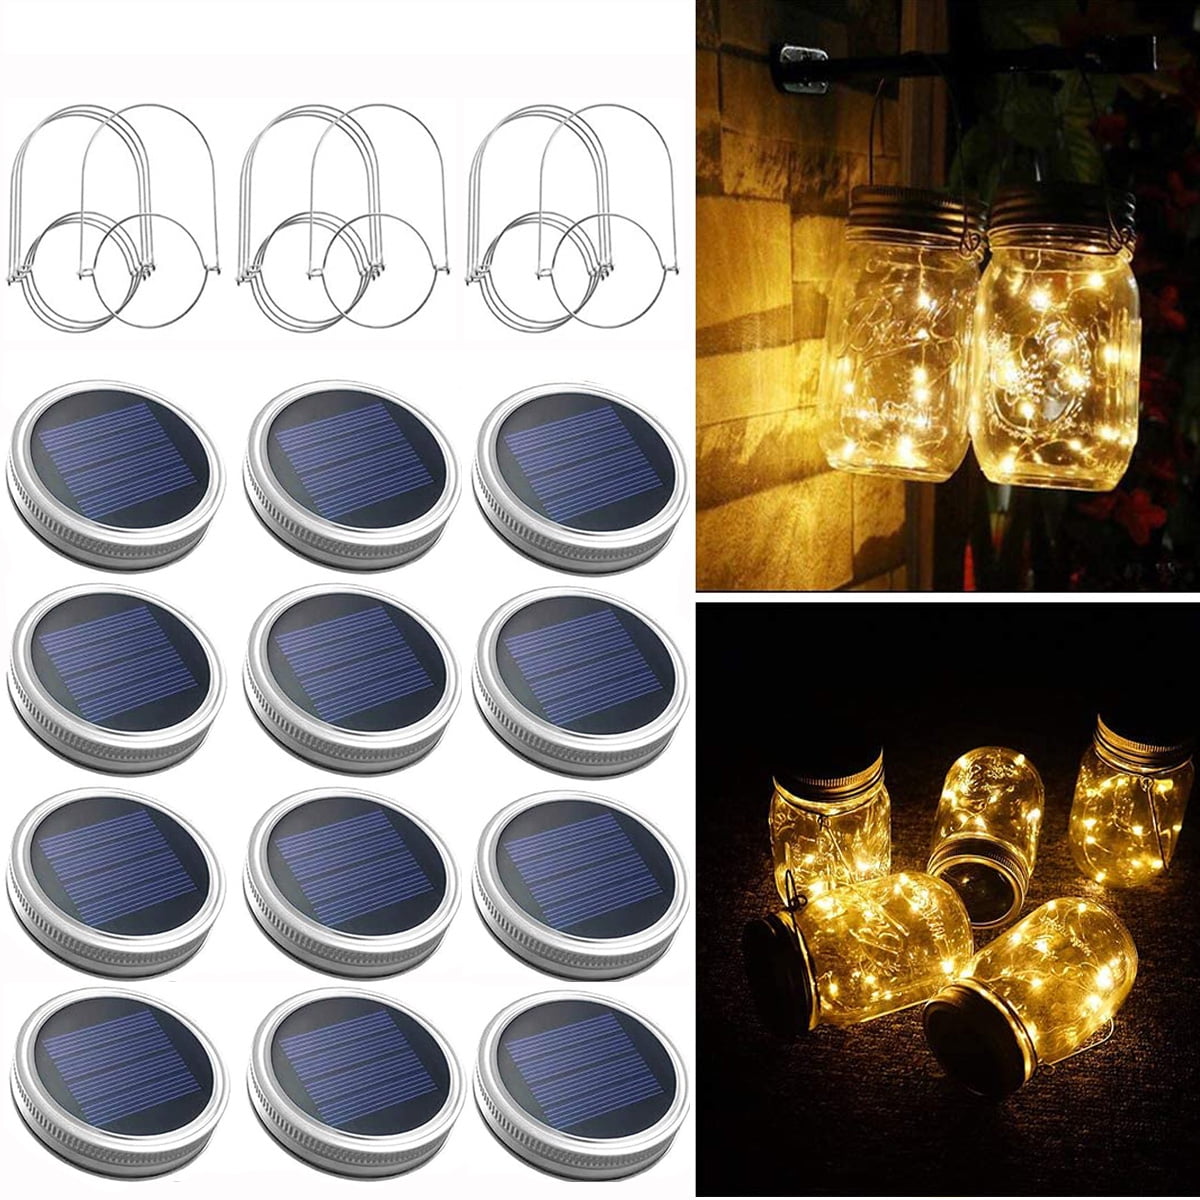 Firefly Mini LED Jar Starlights Light Up Home Decoration Gift For Mum Dad Family 